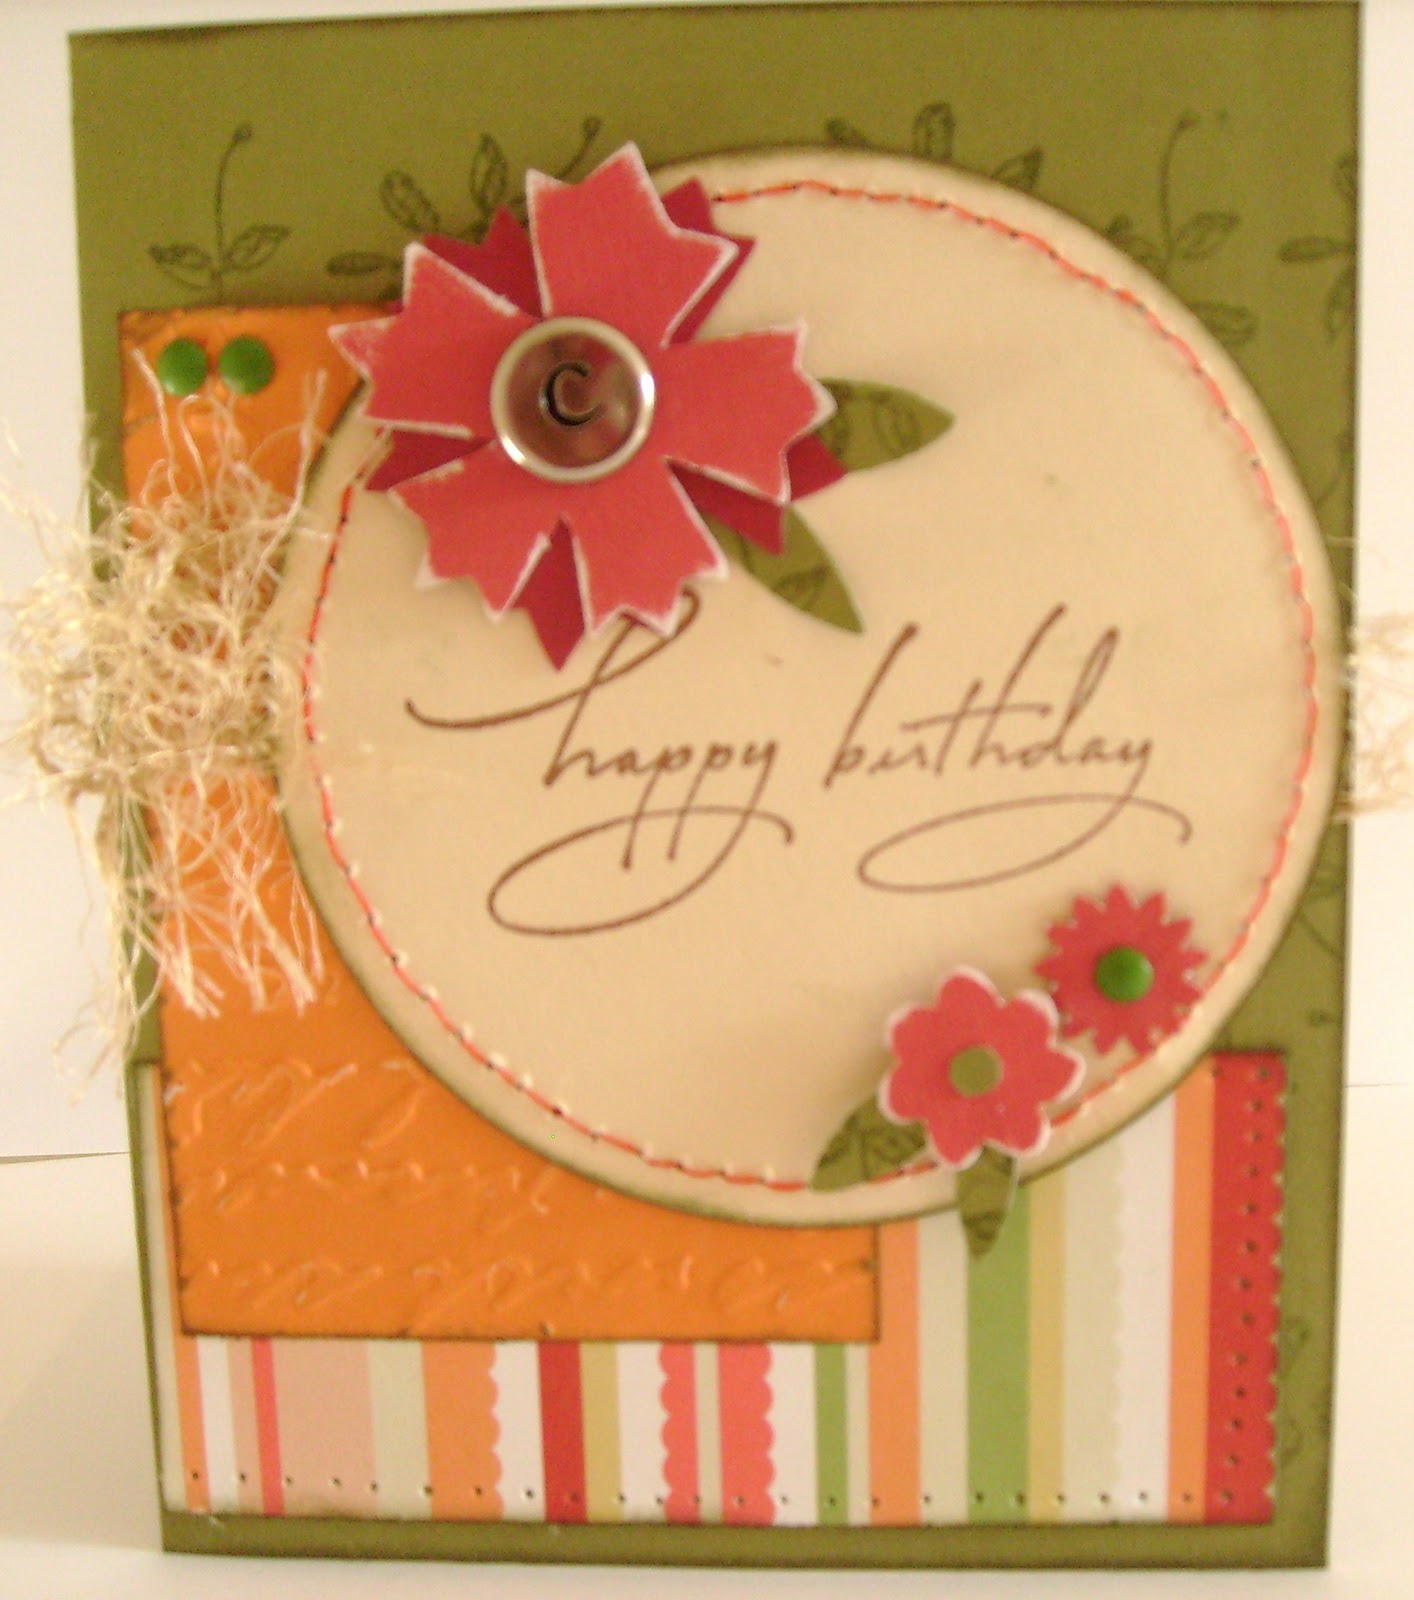 cards-to-bless-happy-birthday-fall-card